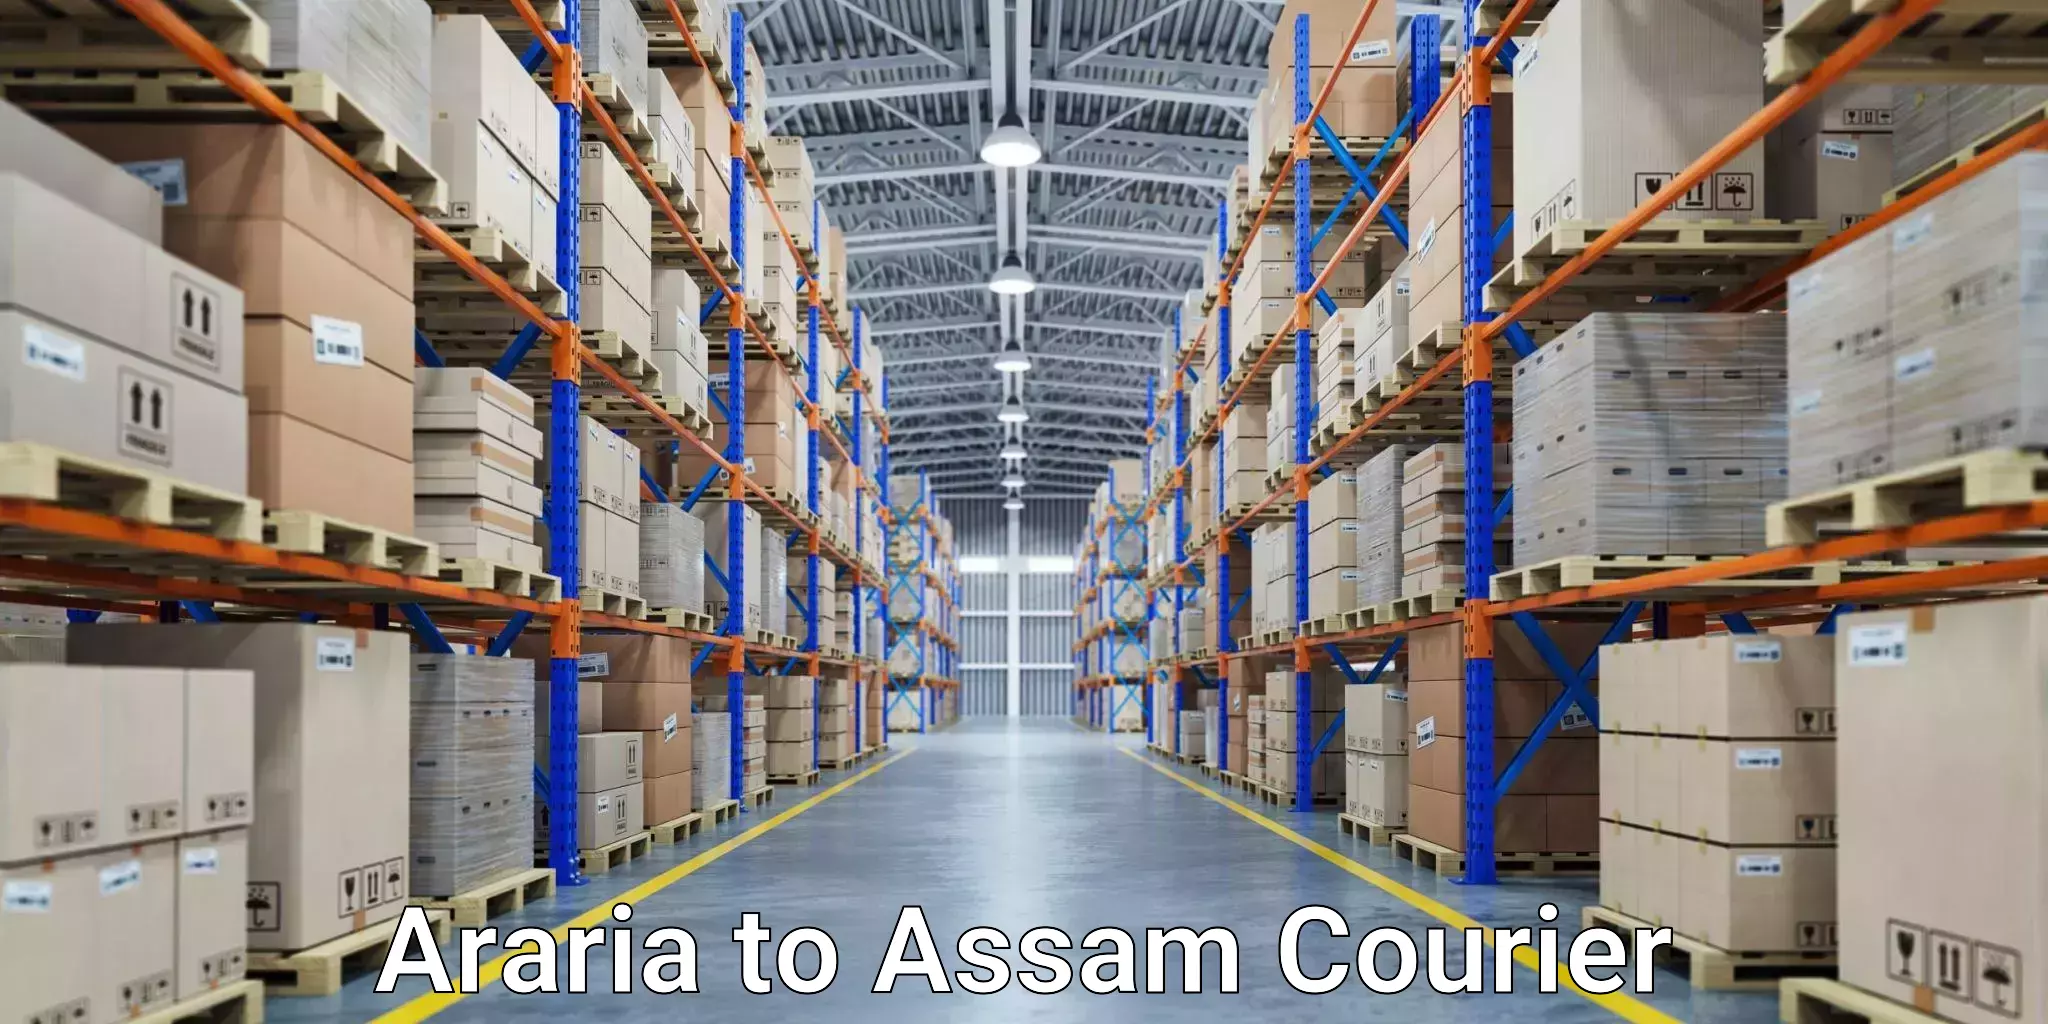 Bulk courier orders Araria to Lakhipur